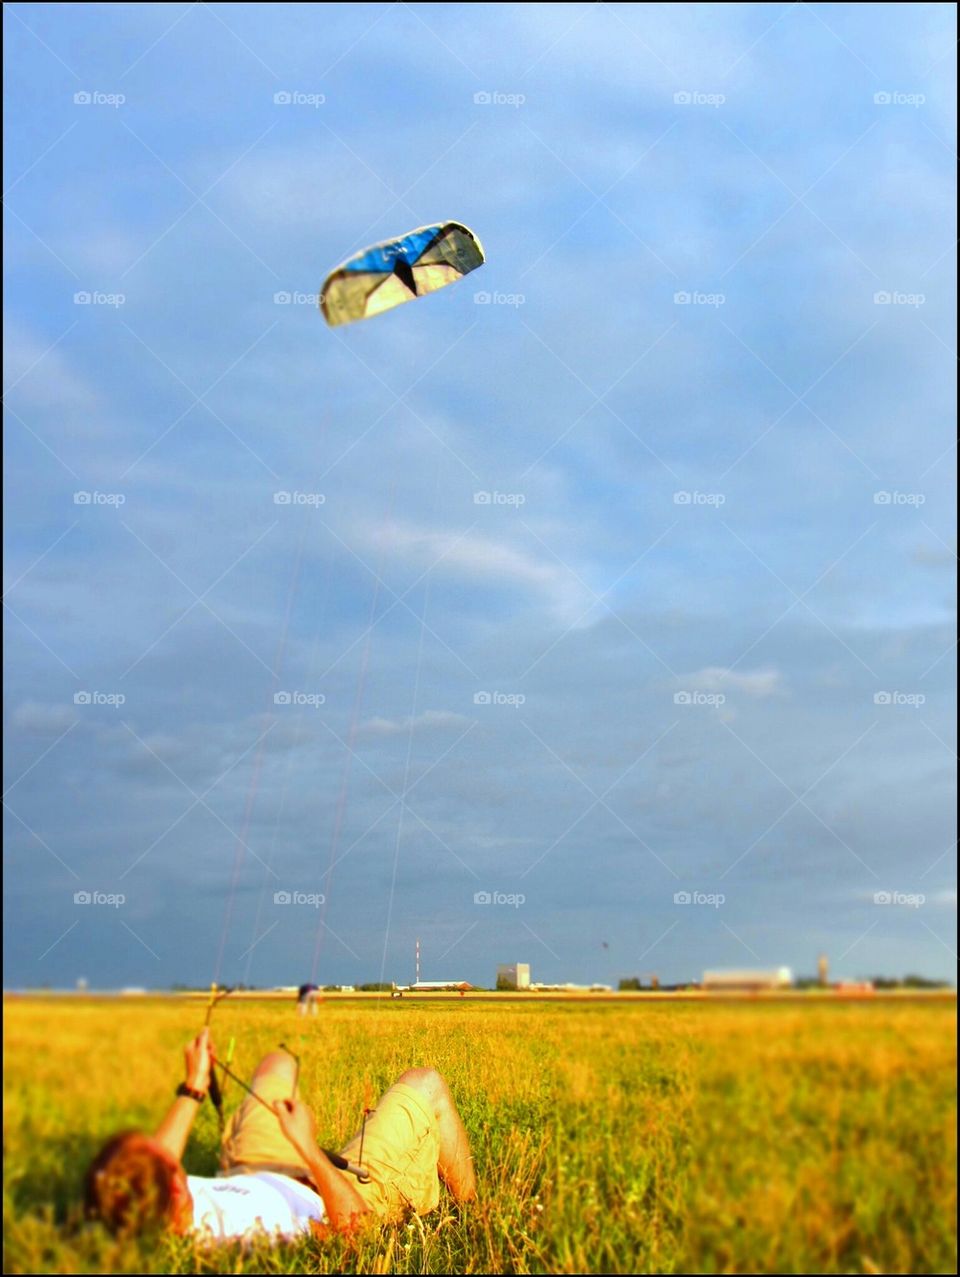 lets fly a kite